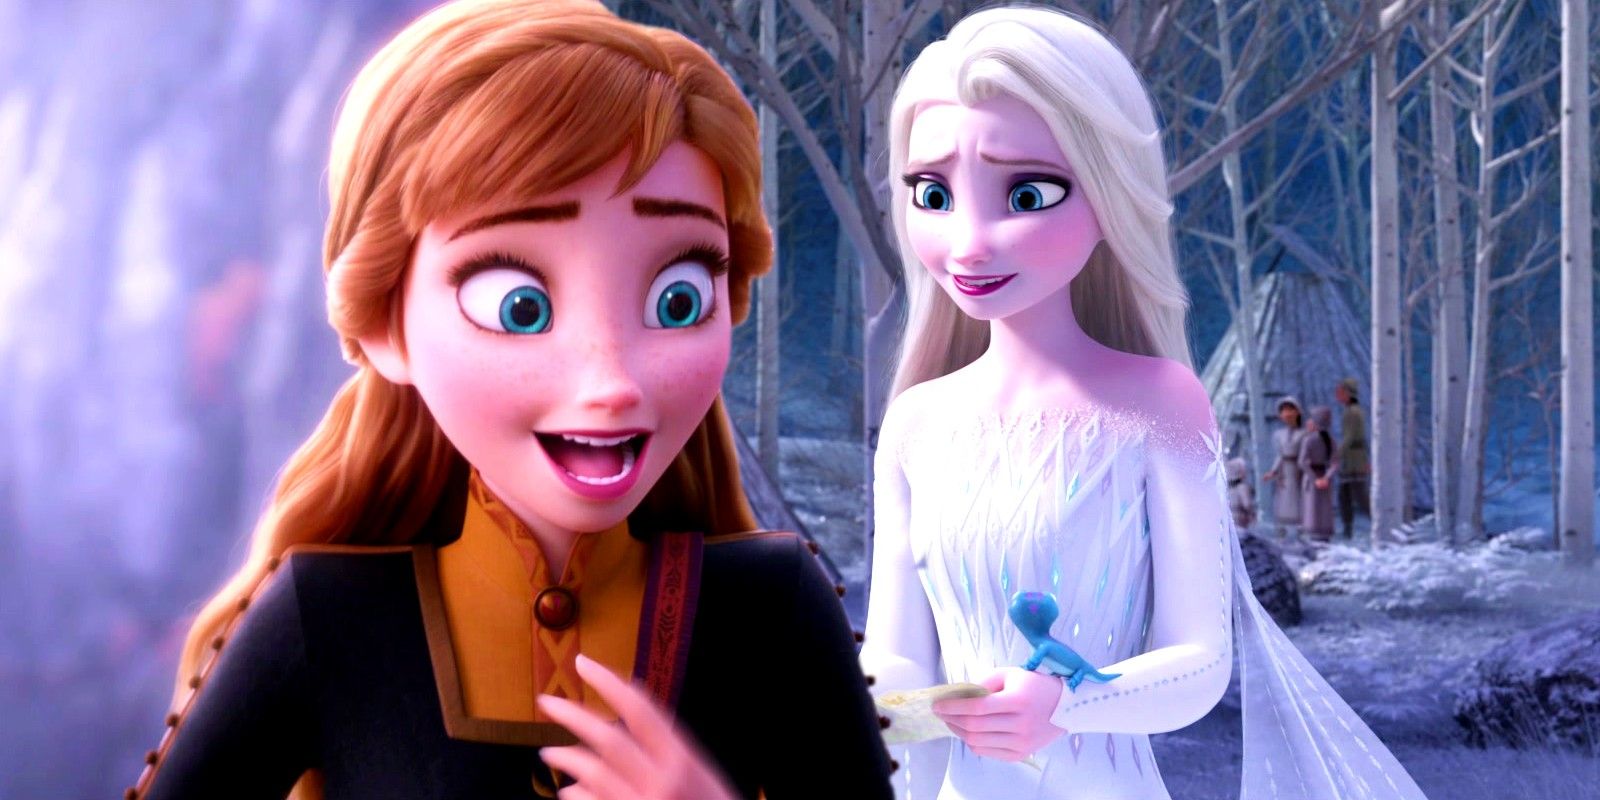 Critical Detail Revealed About Disney's 'Frozen 3' Movie